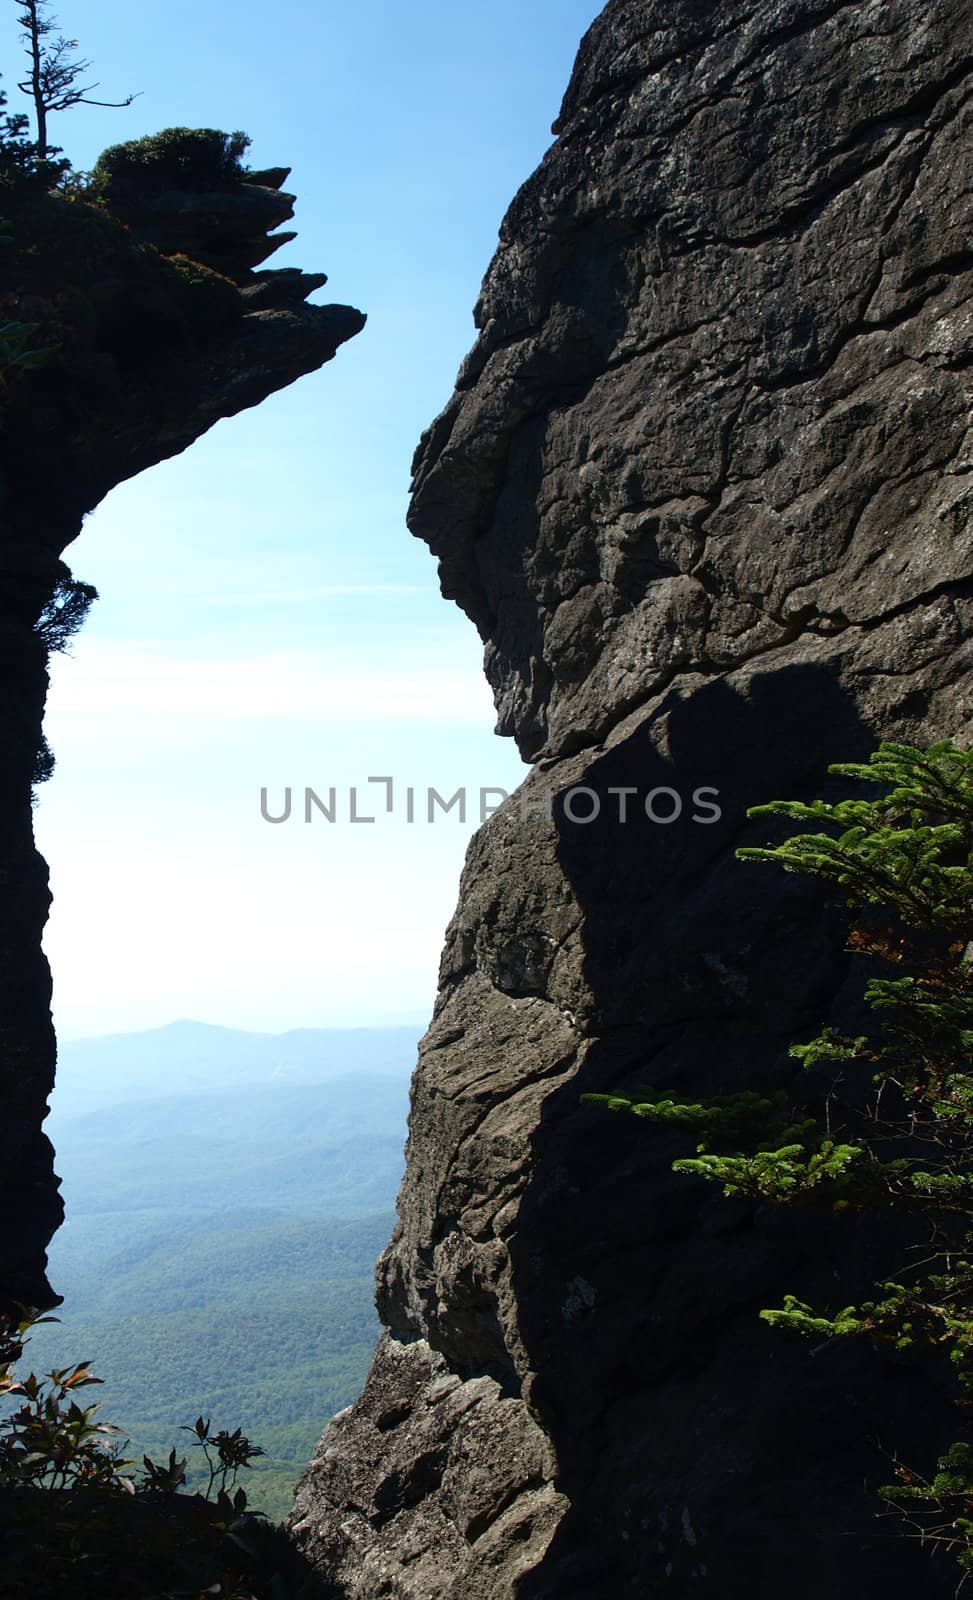 Along the trail at Grandfather mountain in North Carolina, view through the rocks